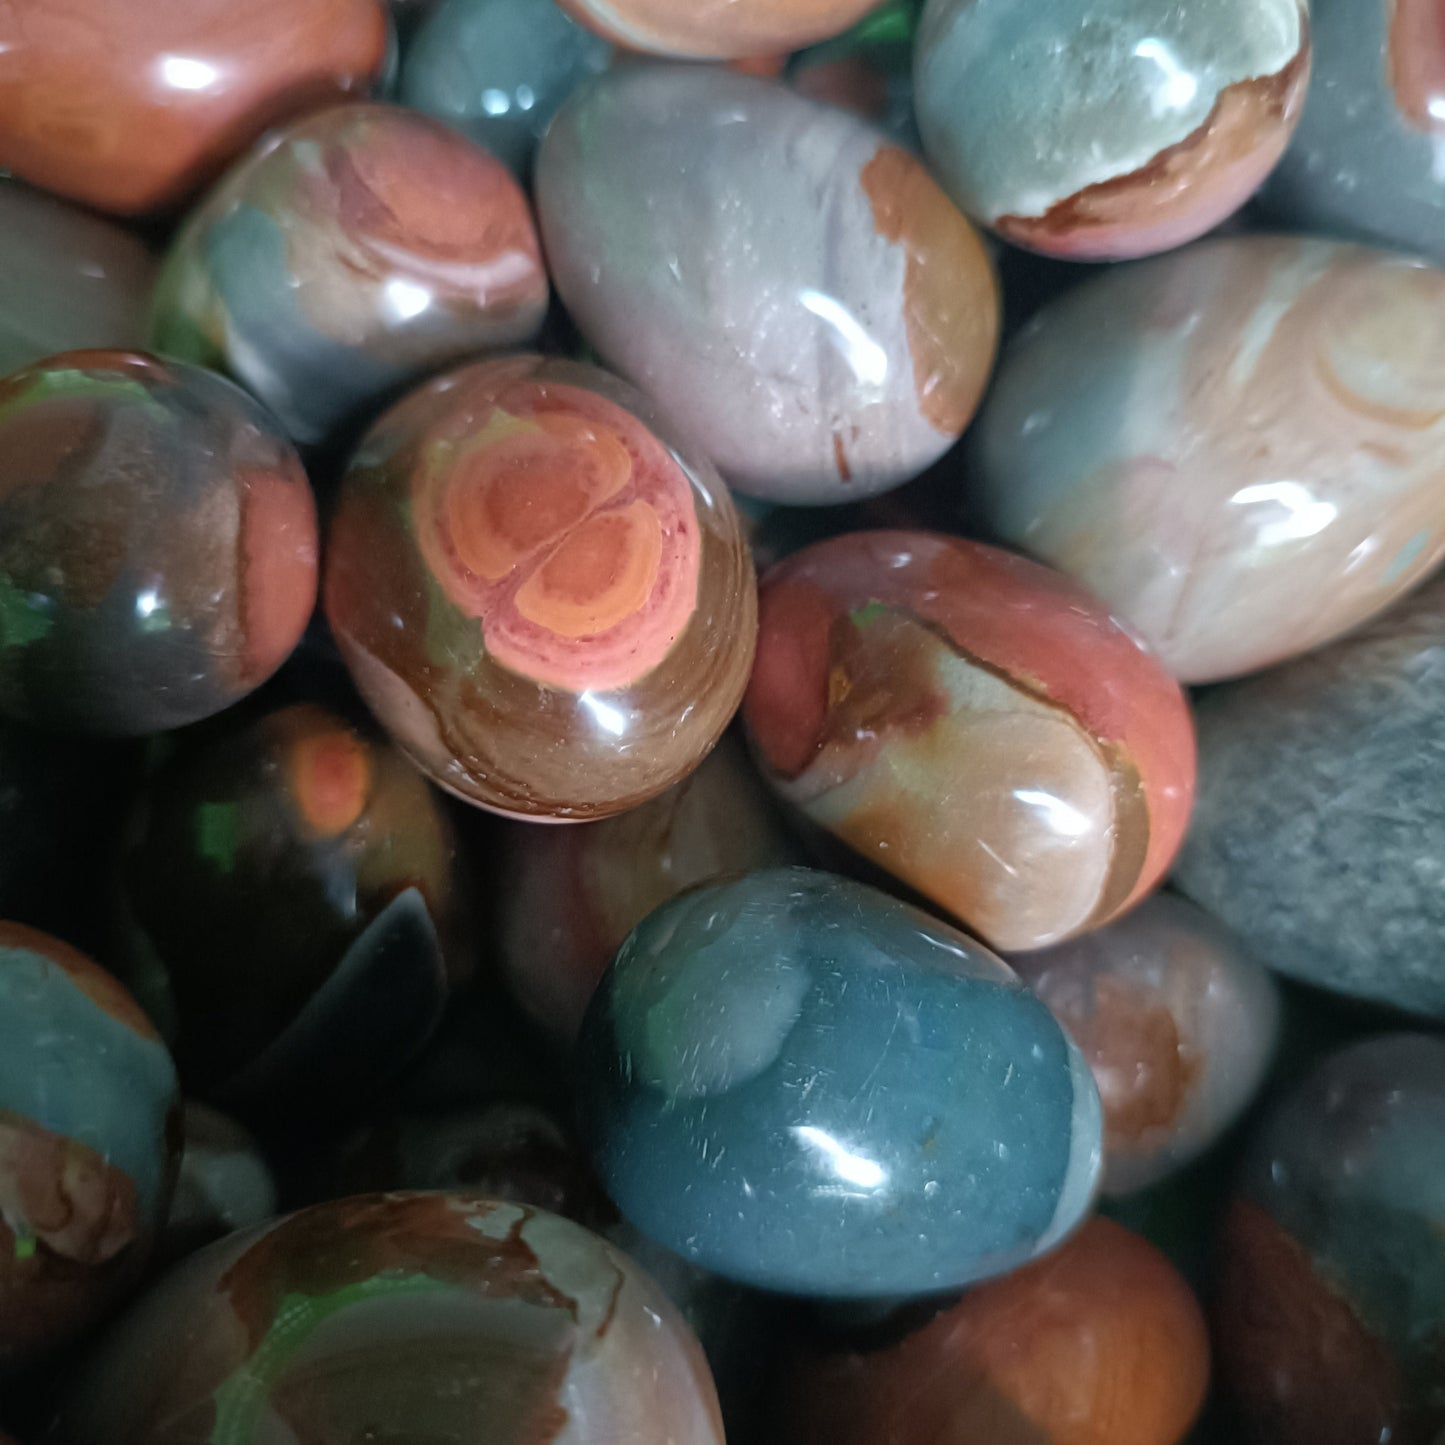 Buy 1 Piece Of Flower Agate Star Get 3 Extra Taking-prime